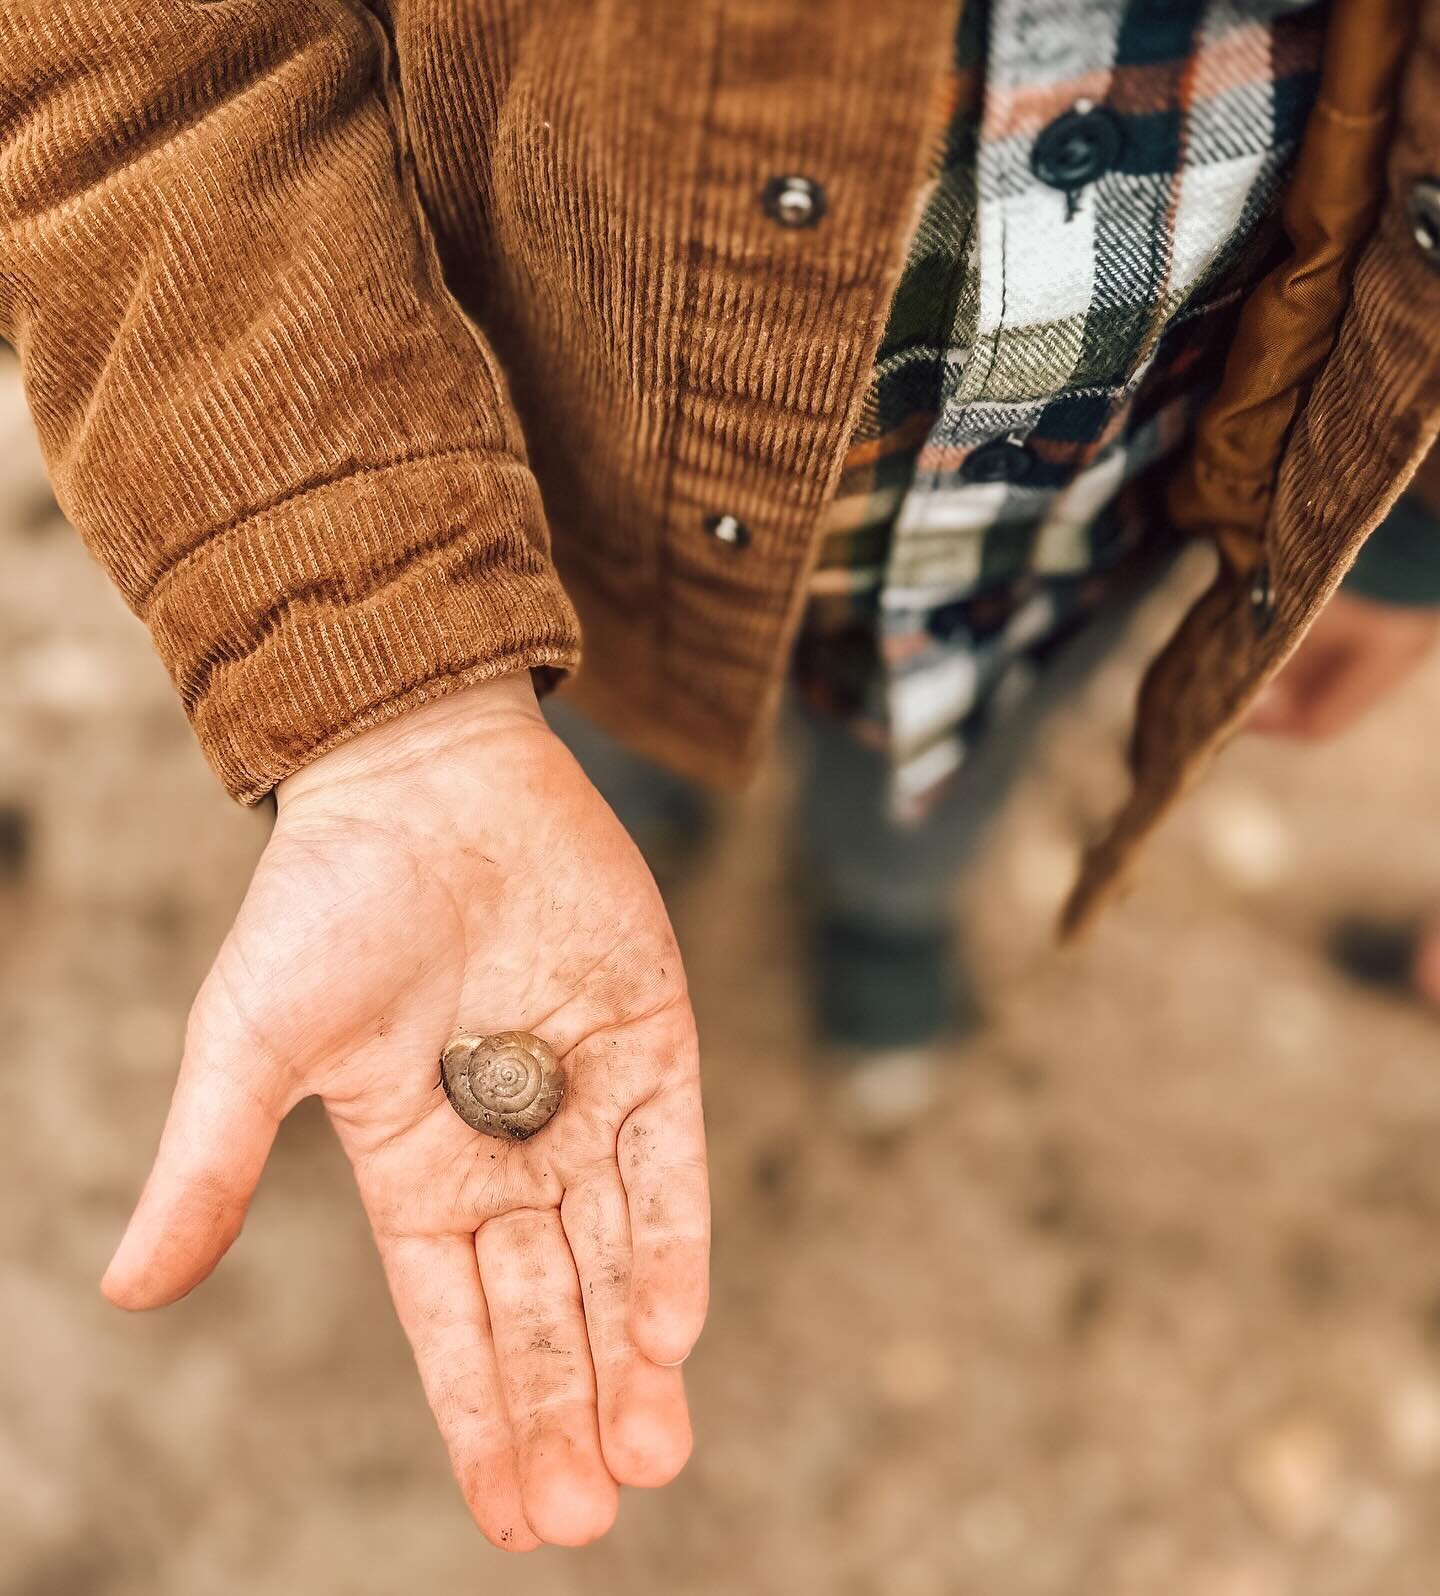 &ldquo;There&rsquo;s treasure everywhere!&rdquo; 
- Calvin (Bill Watterson)

We do more laundry than I would want to, but to have days where you get to dig in and immerse yourself in nature, to wonder, and skate in mud is totally worth the extra load